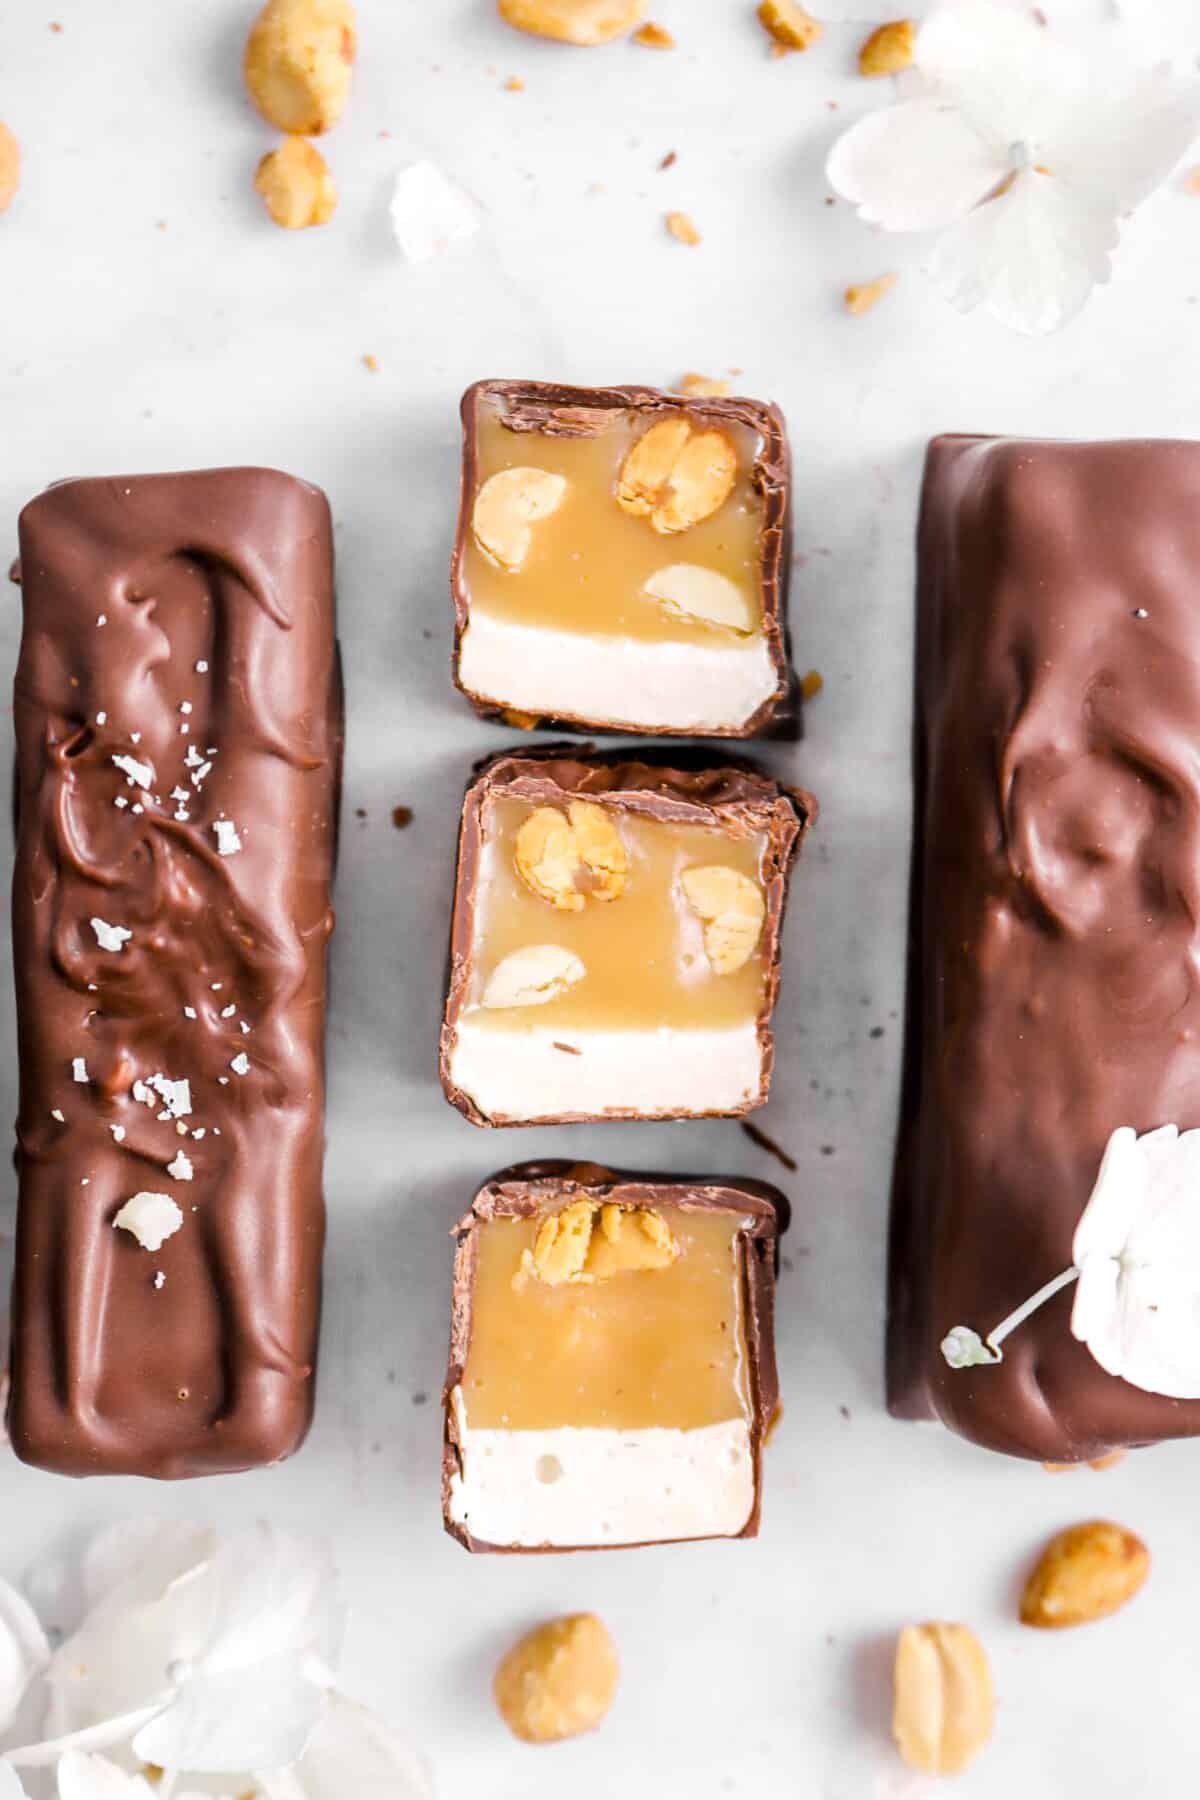 three slices of snickers facing up with two bars beside